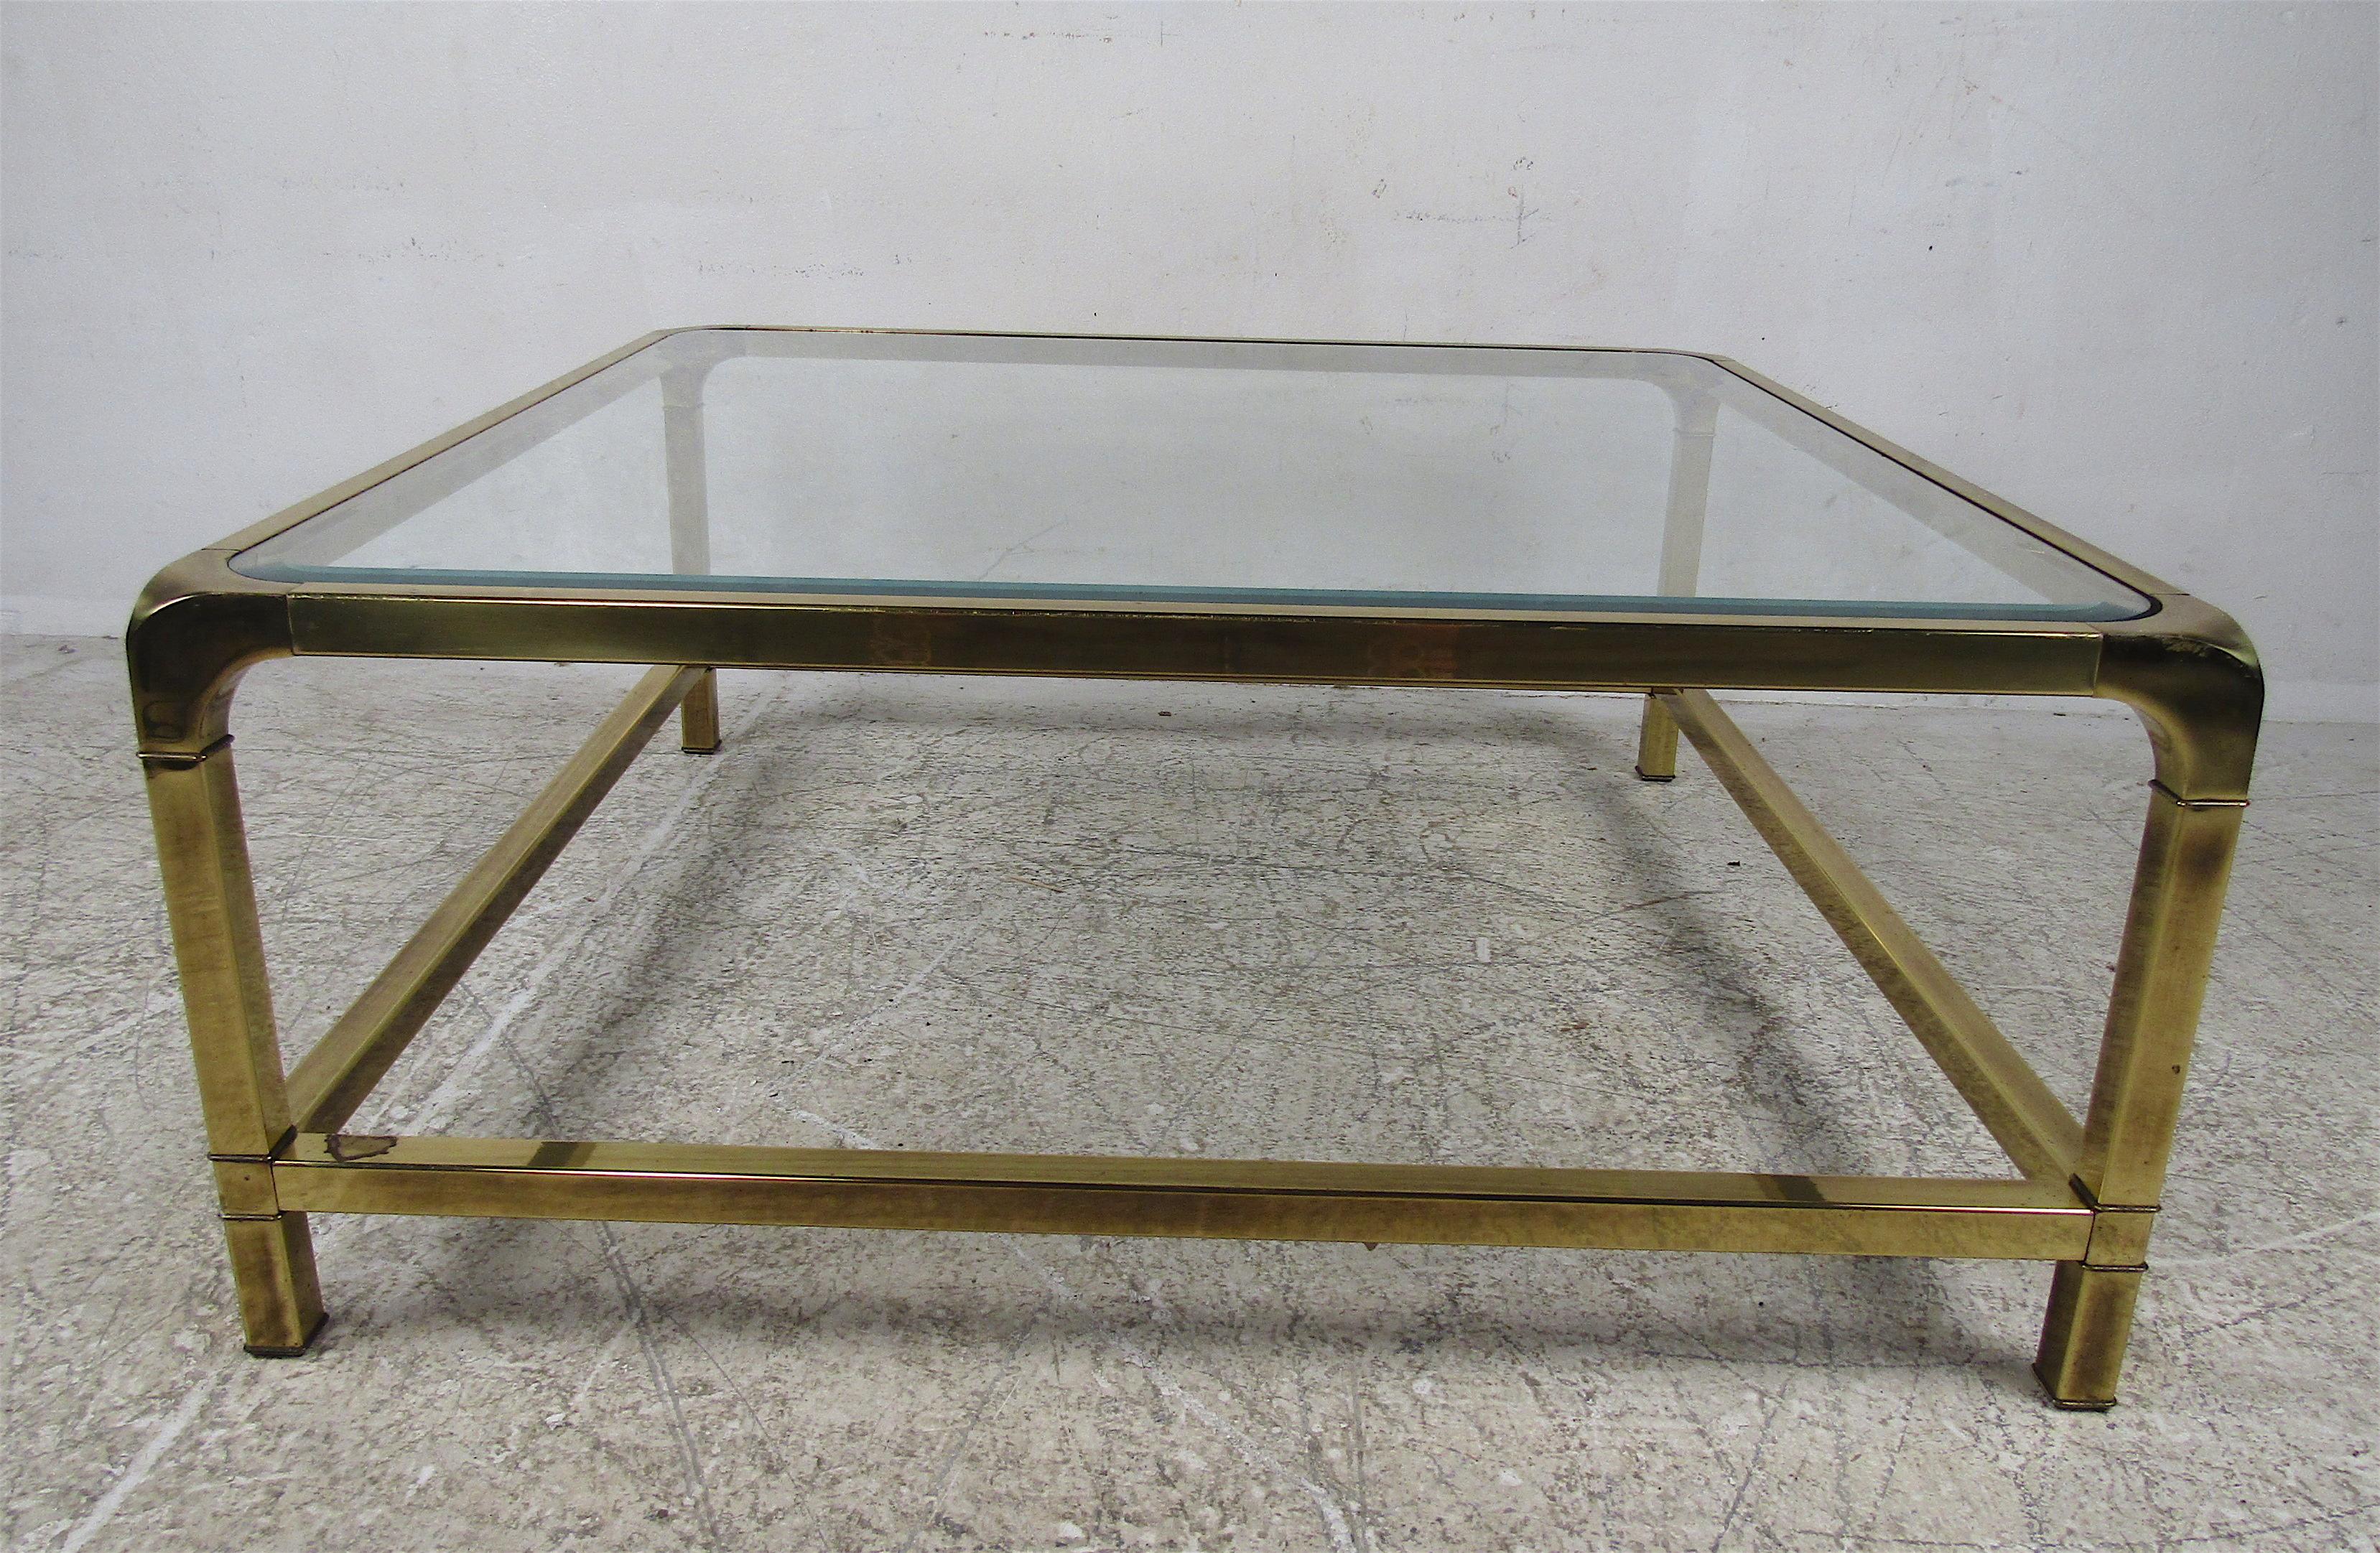 A stunning vintage modern cocktail table with thick beveled glass and a heavy brass frame. Unique design with rounded off edges and four added stretchers along the base for sturdiness. A well-made table that looks great in any home, business, or